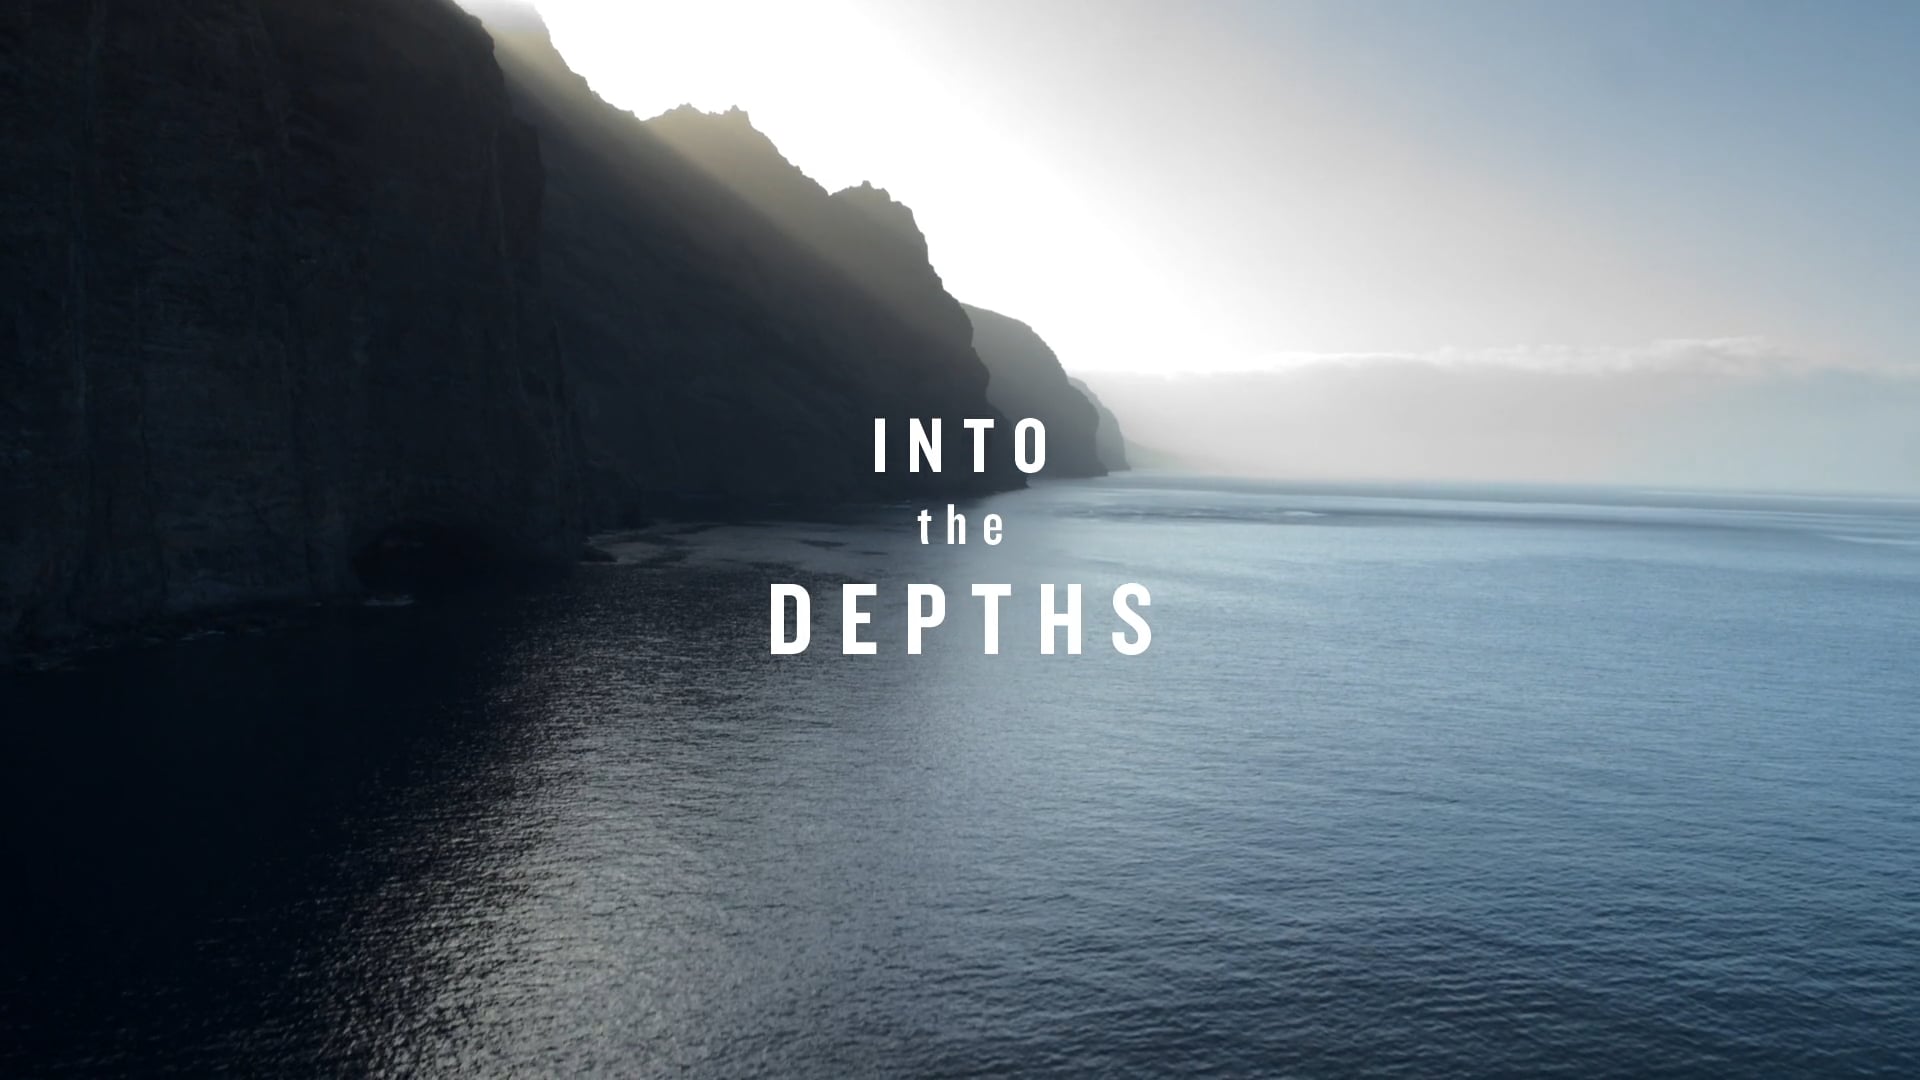 INTO THE DEPTHS